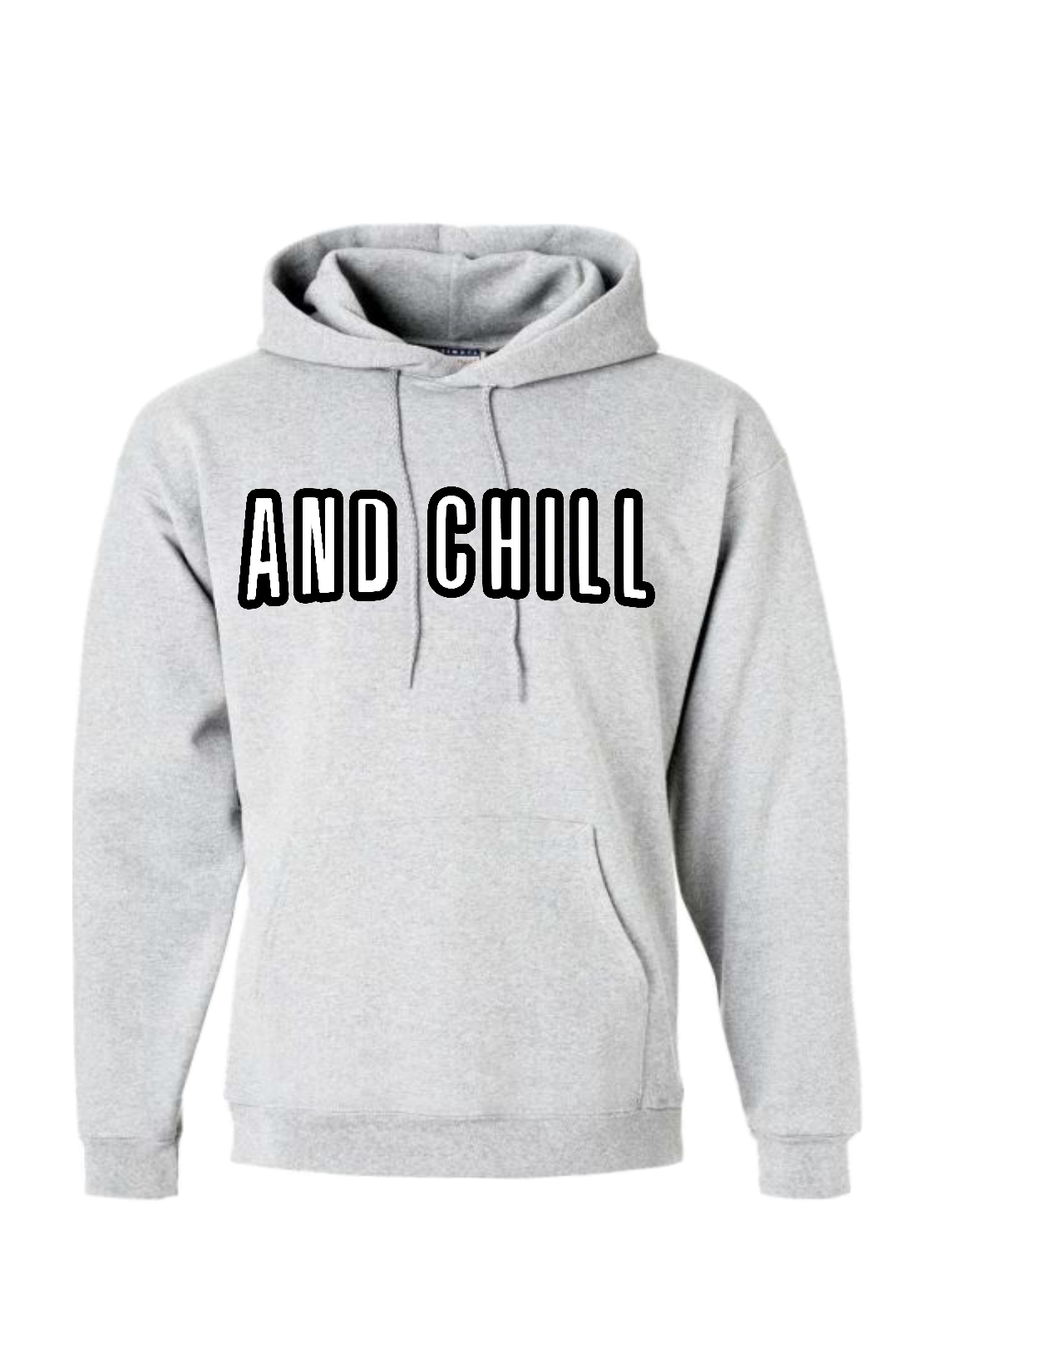 And Chill Hoodie